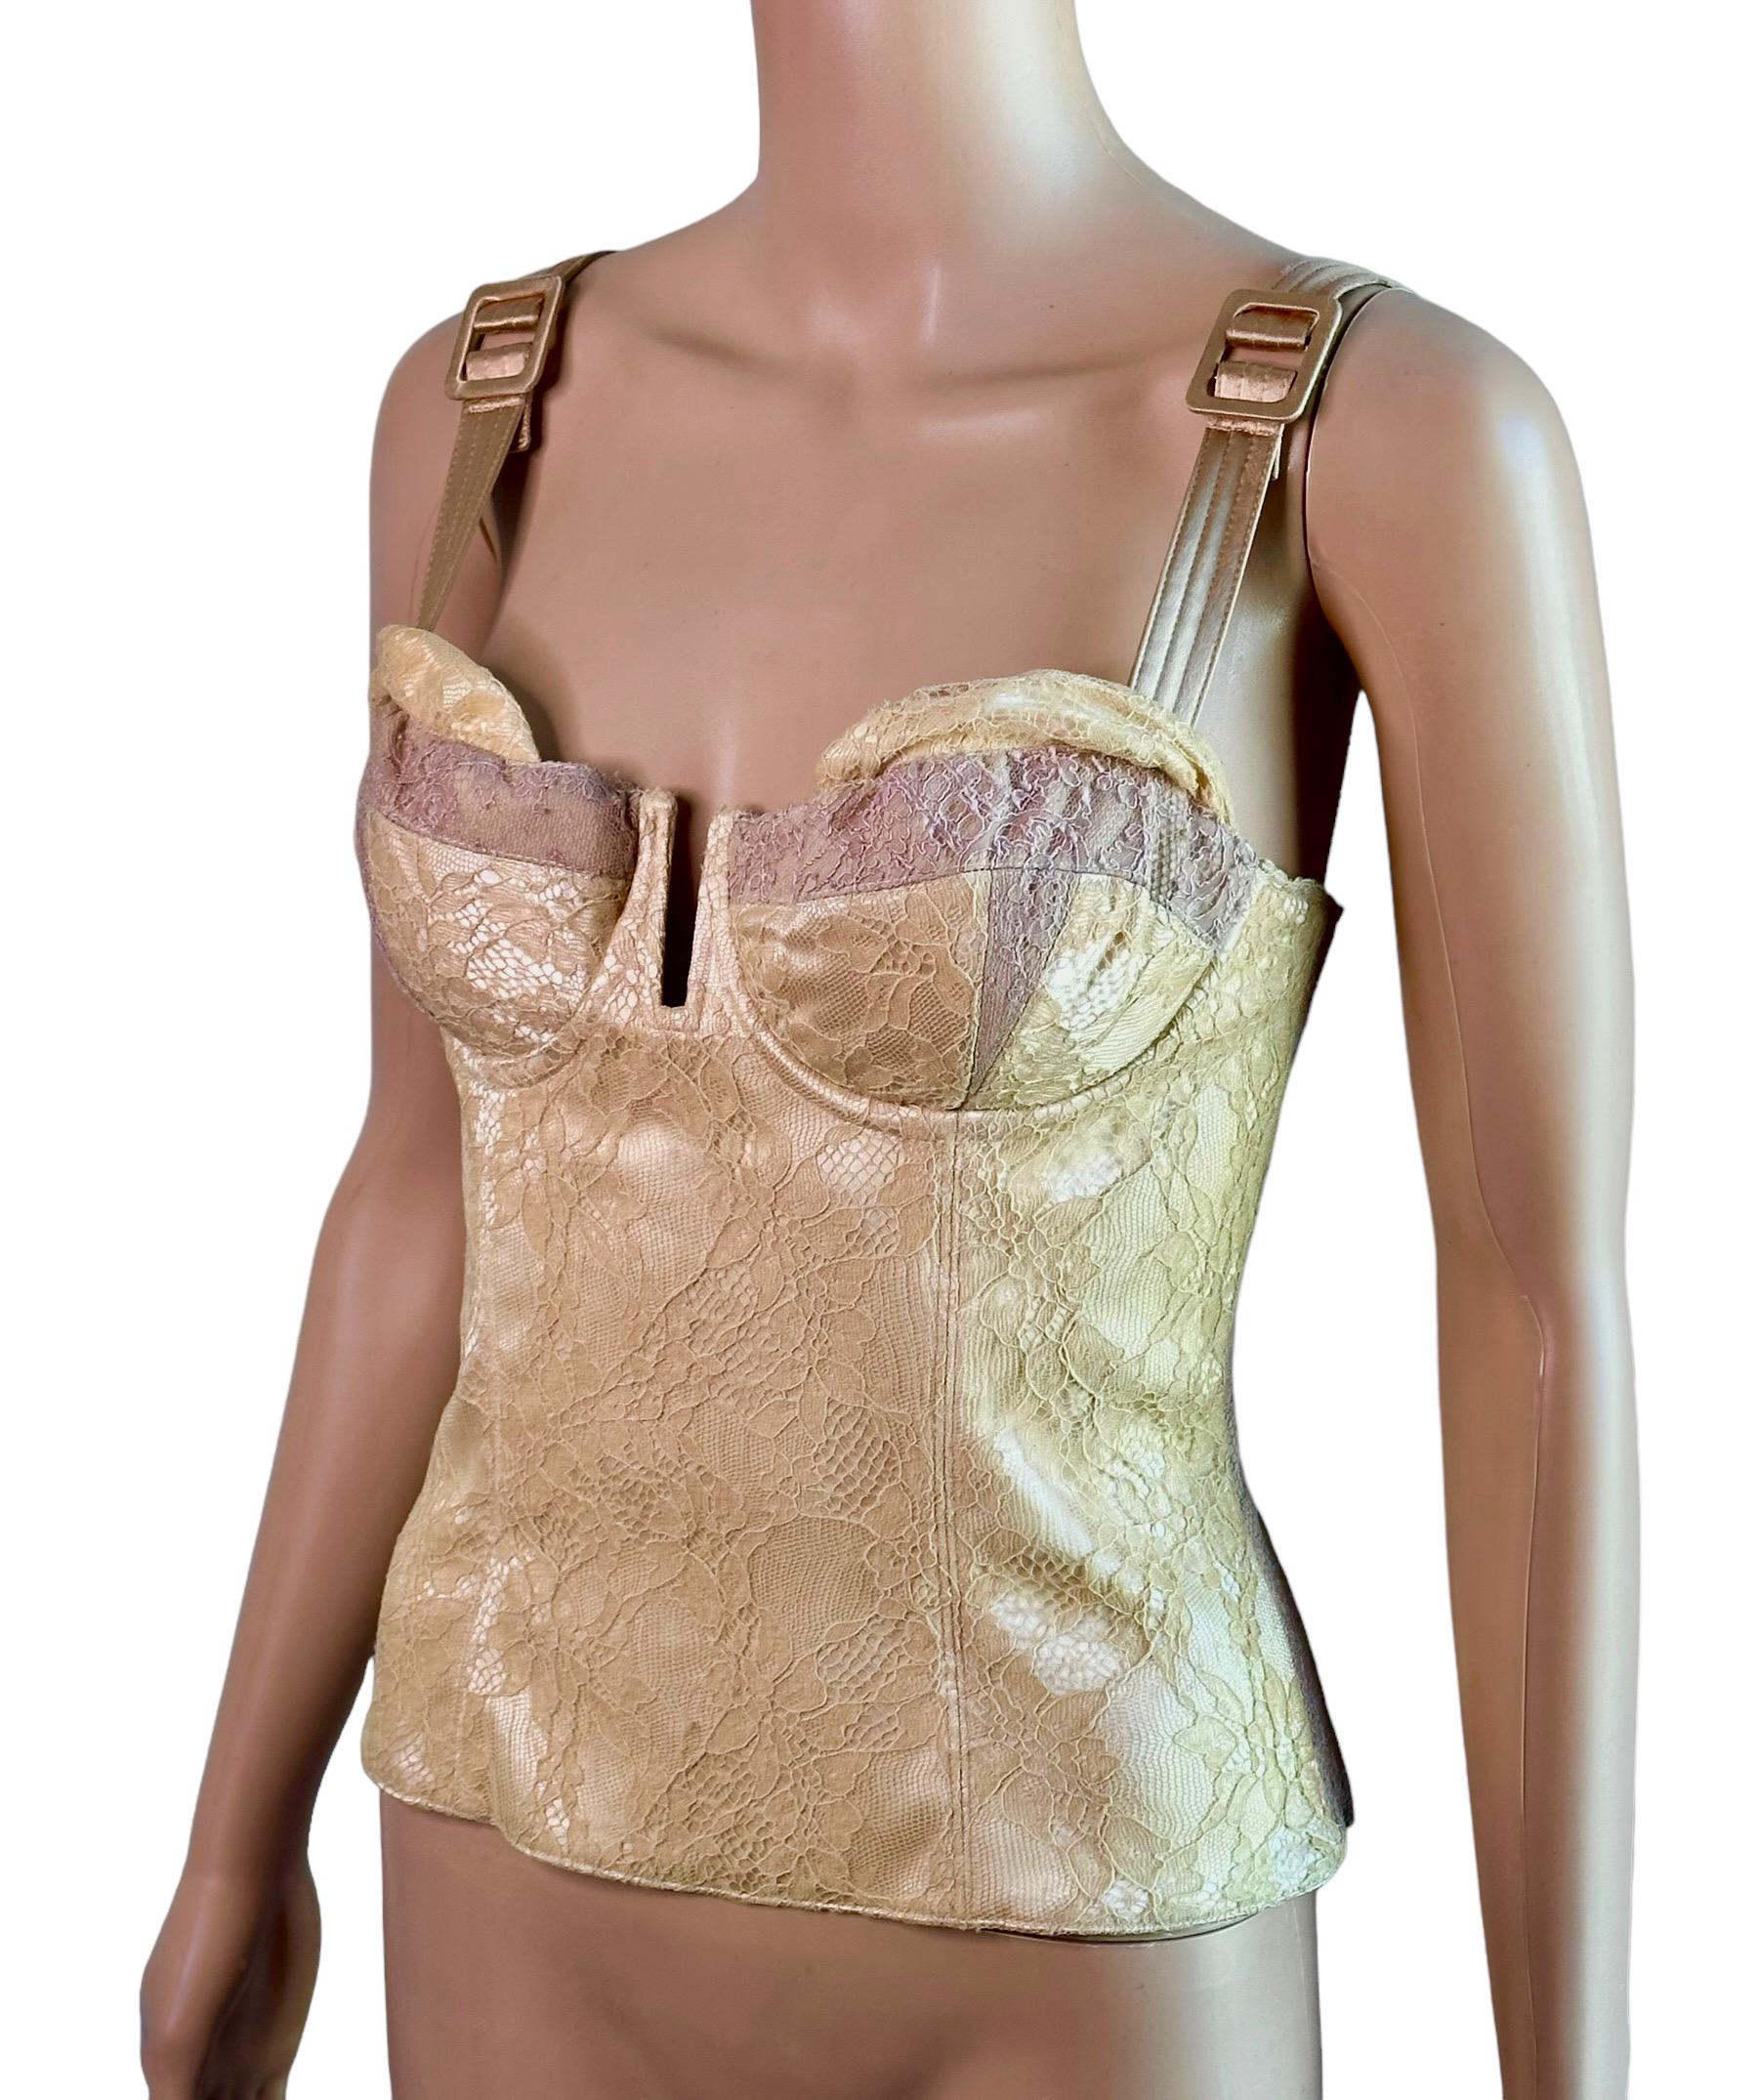 Women's Christian Dior By John Galliano S/S 2004 Runway Bustier Lace Corset Crop Top For Sale